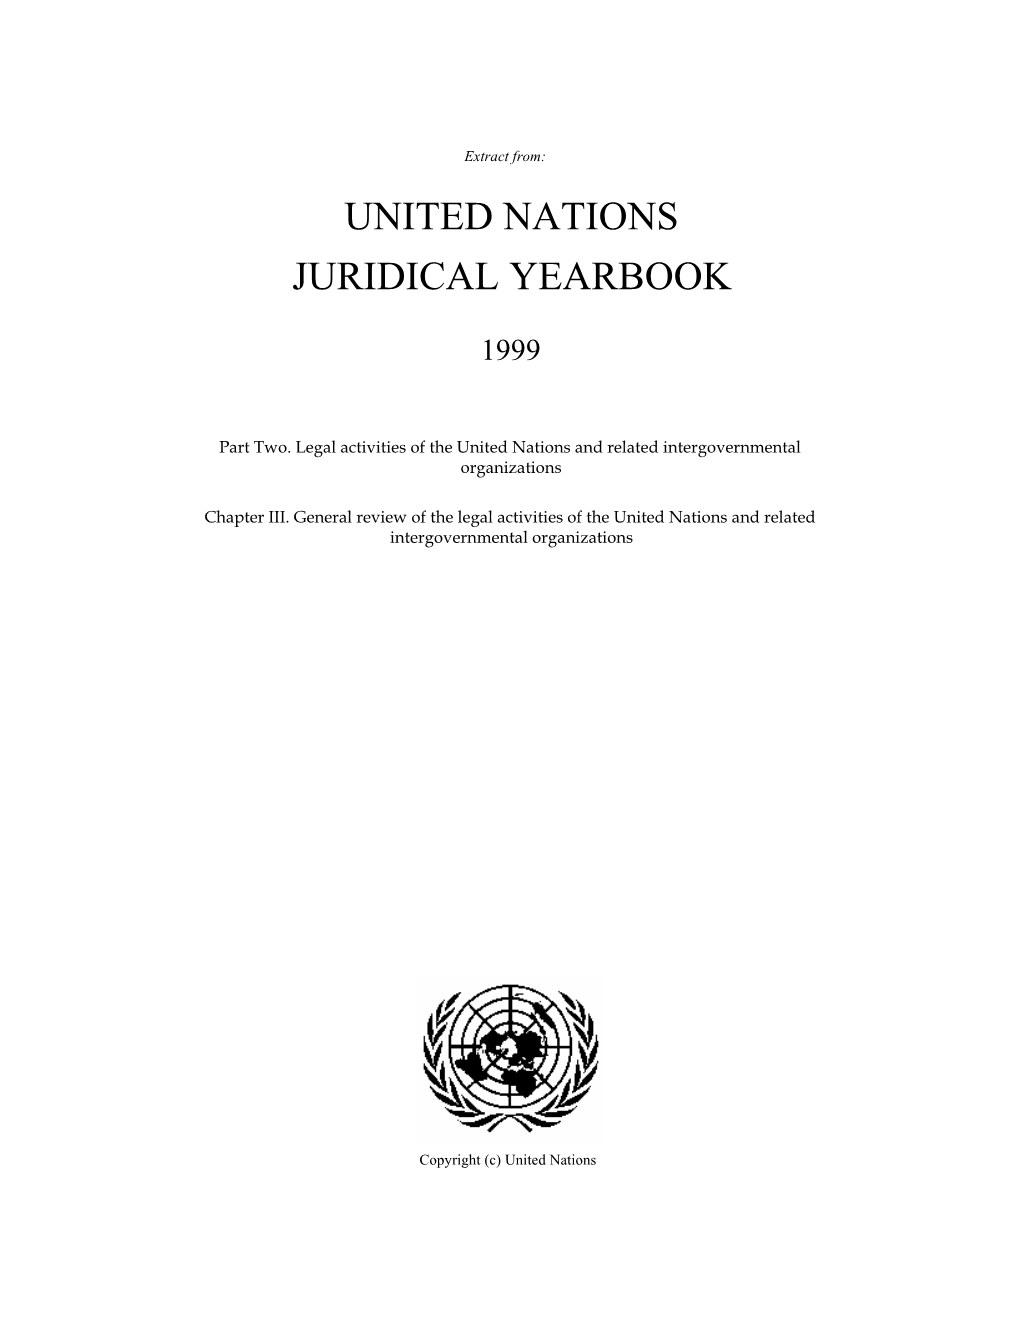 United Nations Juridical Yearbook, 1999